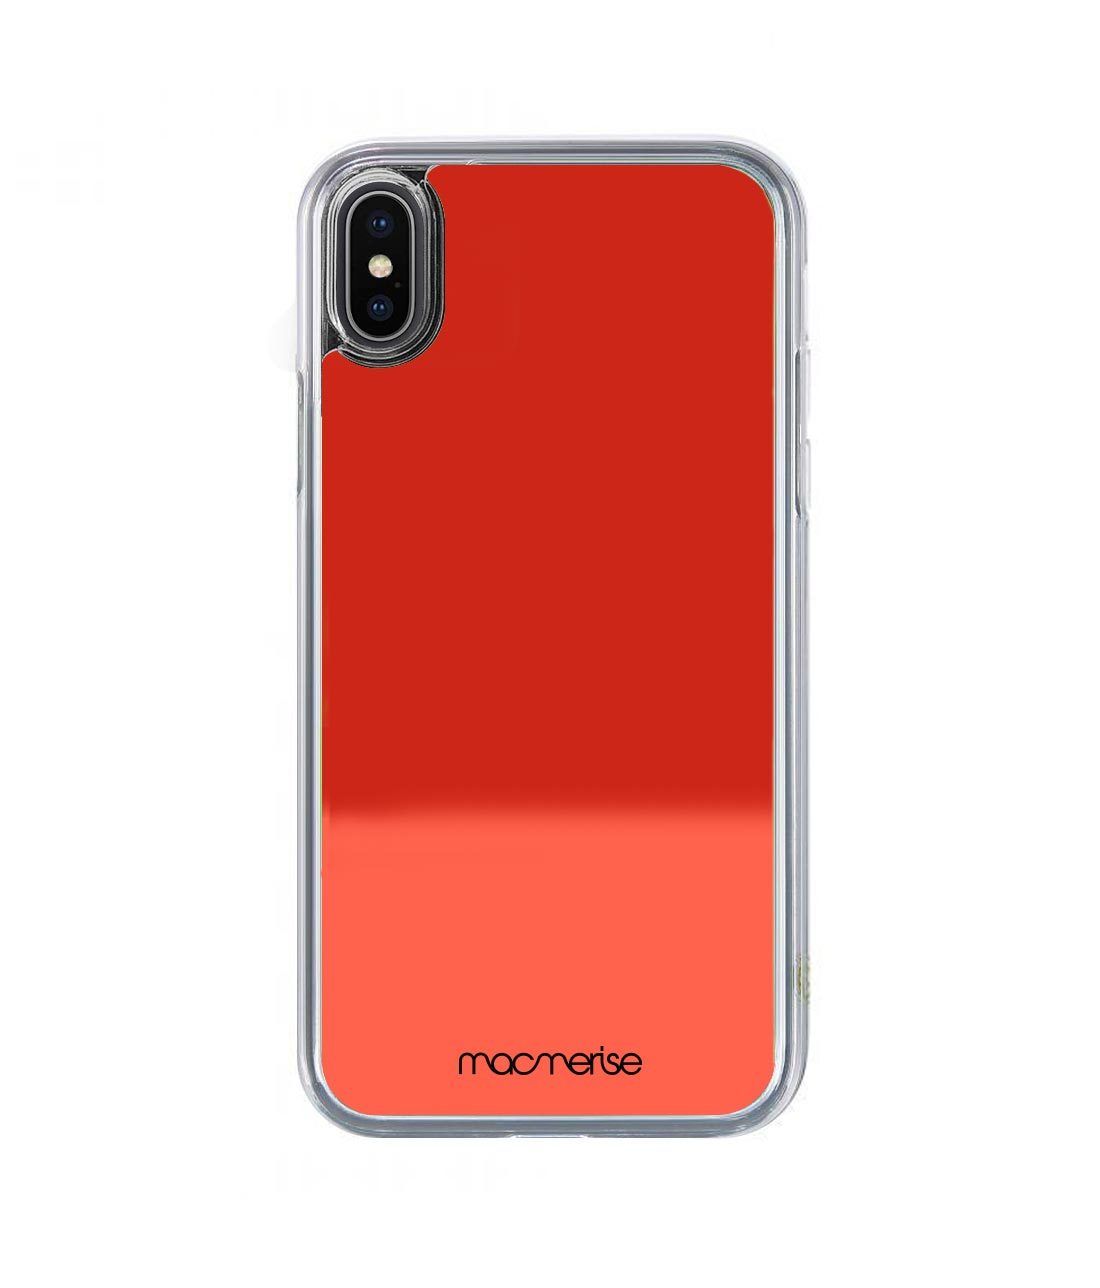 Neon Sand Red - Neon Sand Phone Case for iPhone XS